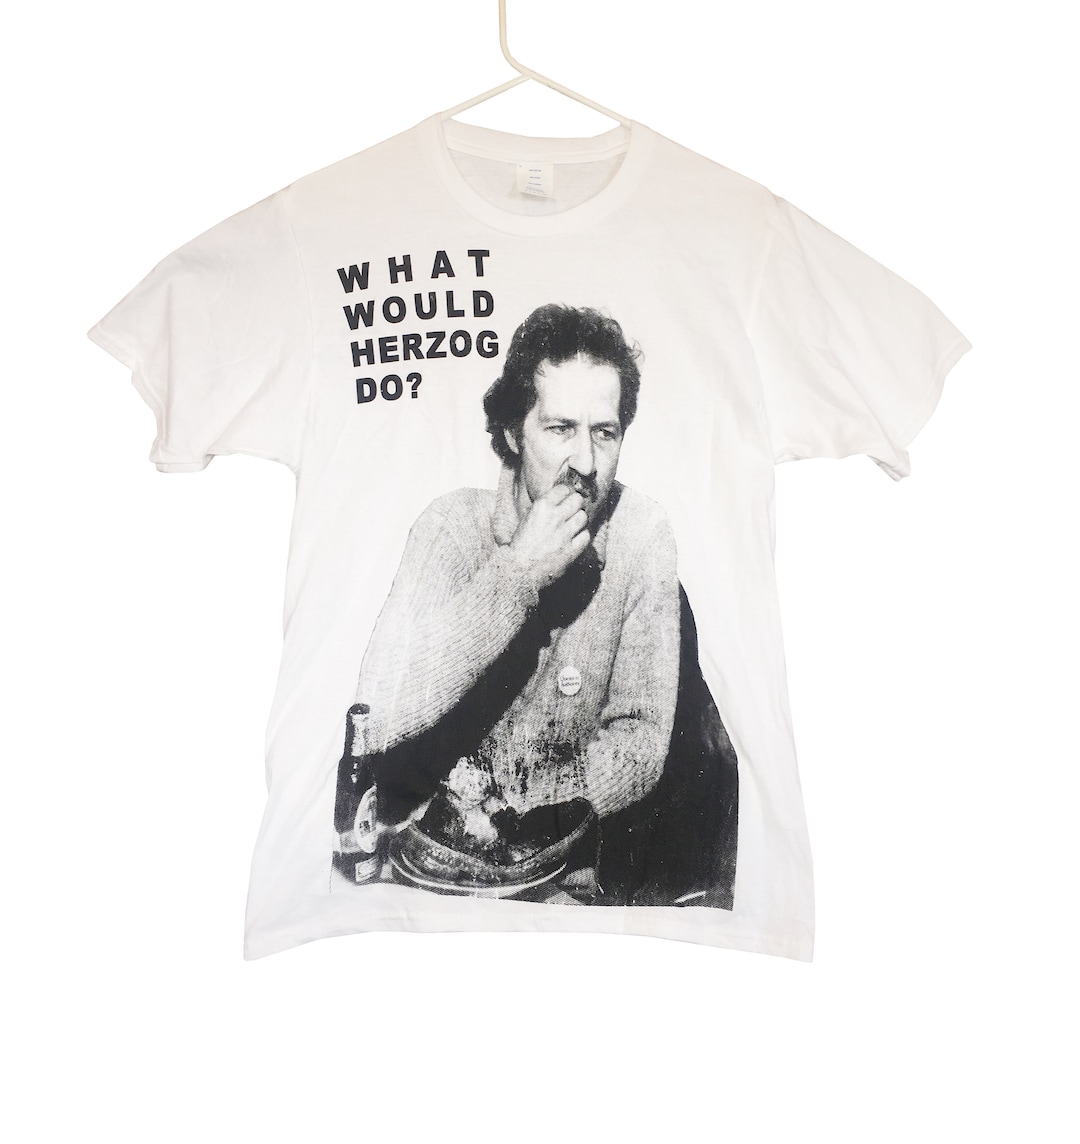 What Would Herzog Do T-shirt Sizes S-M-L-XL